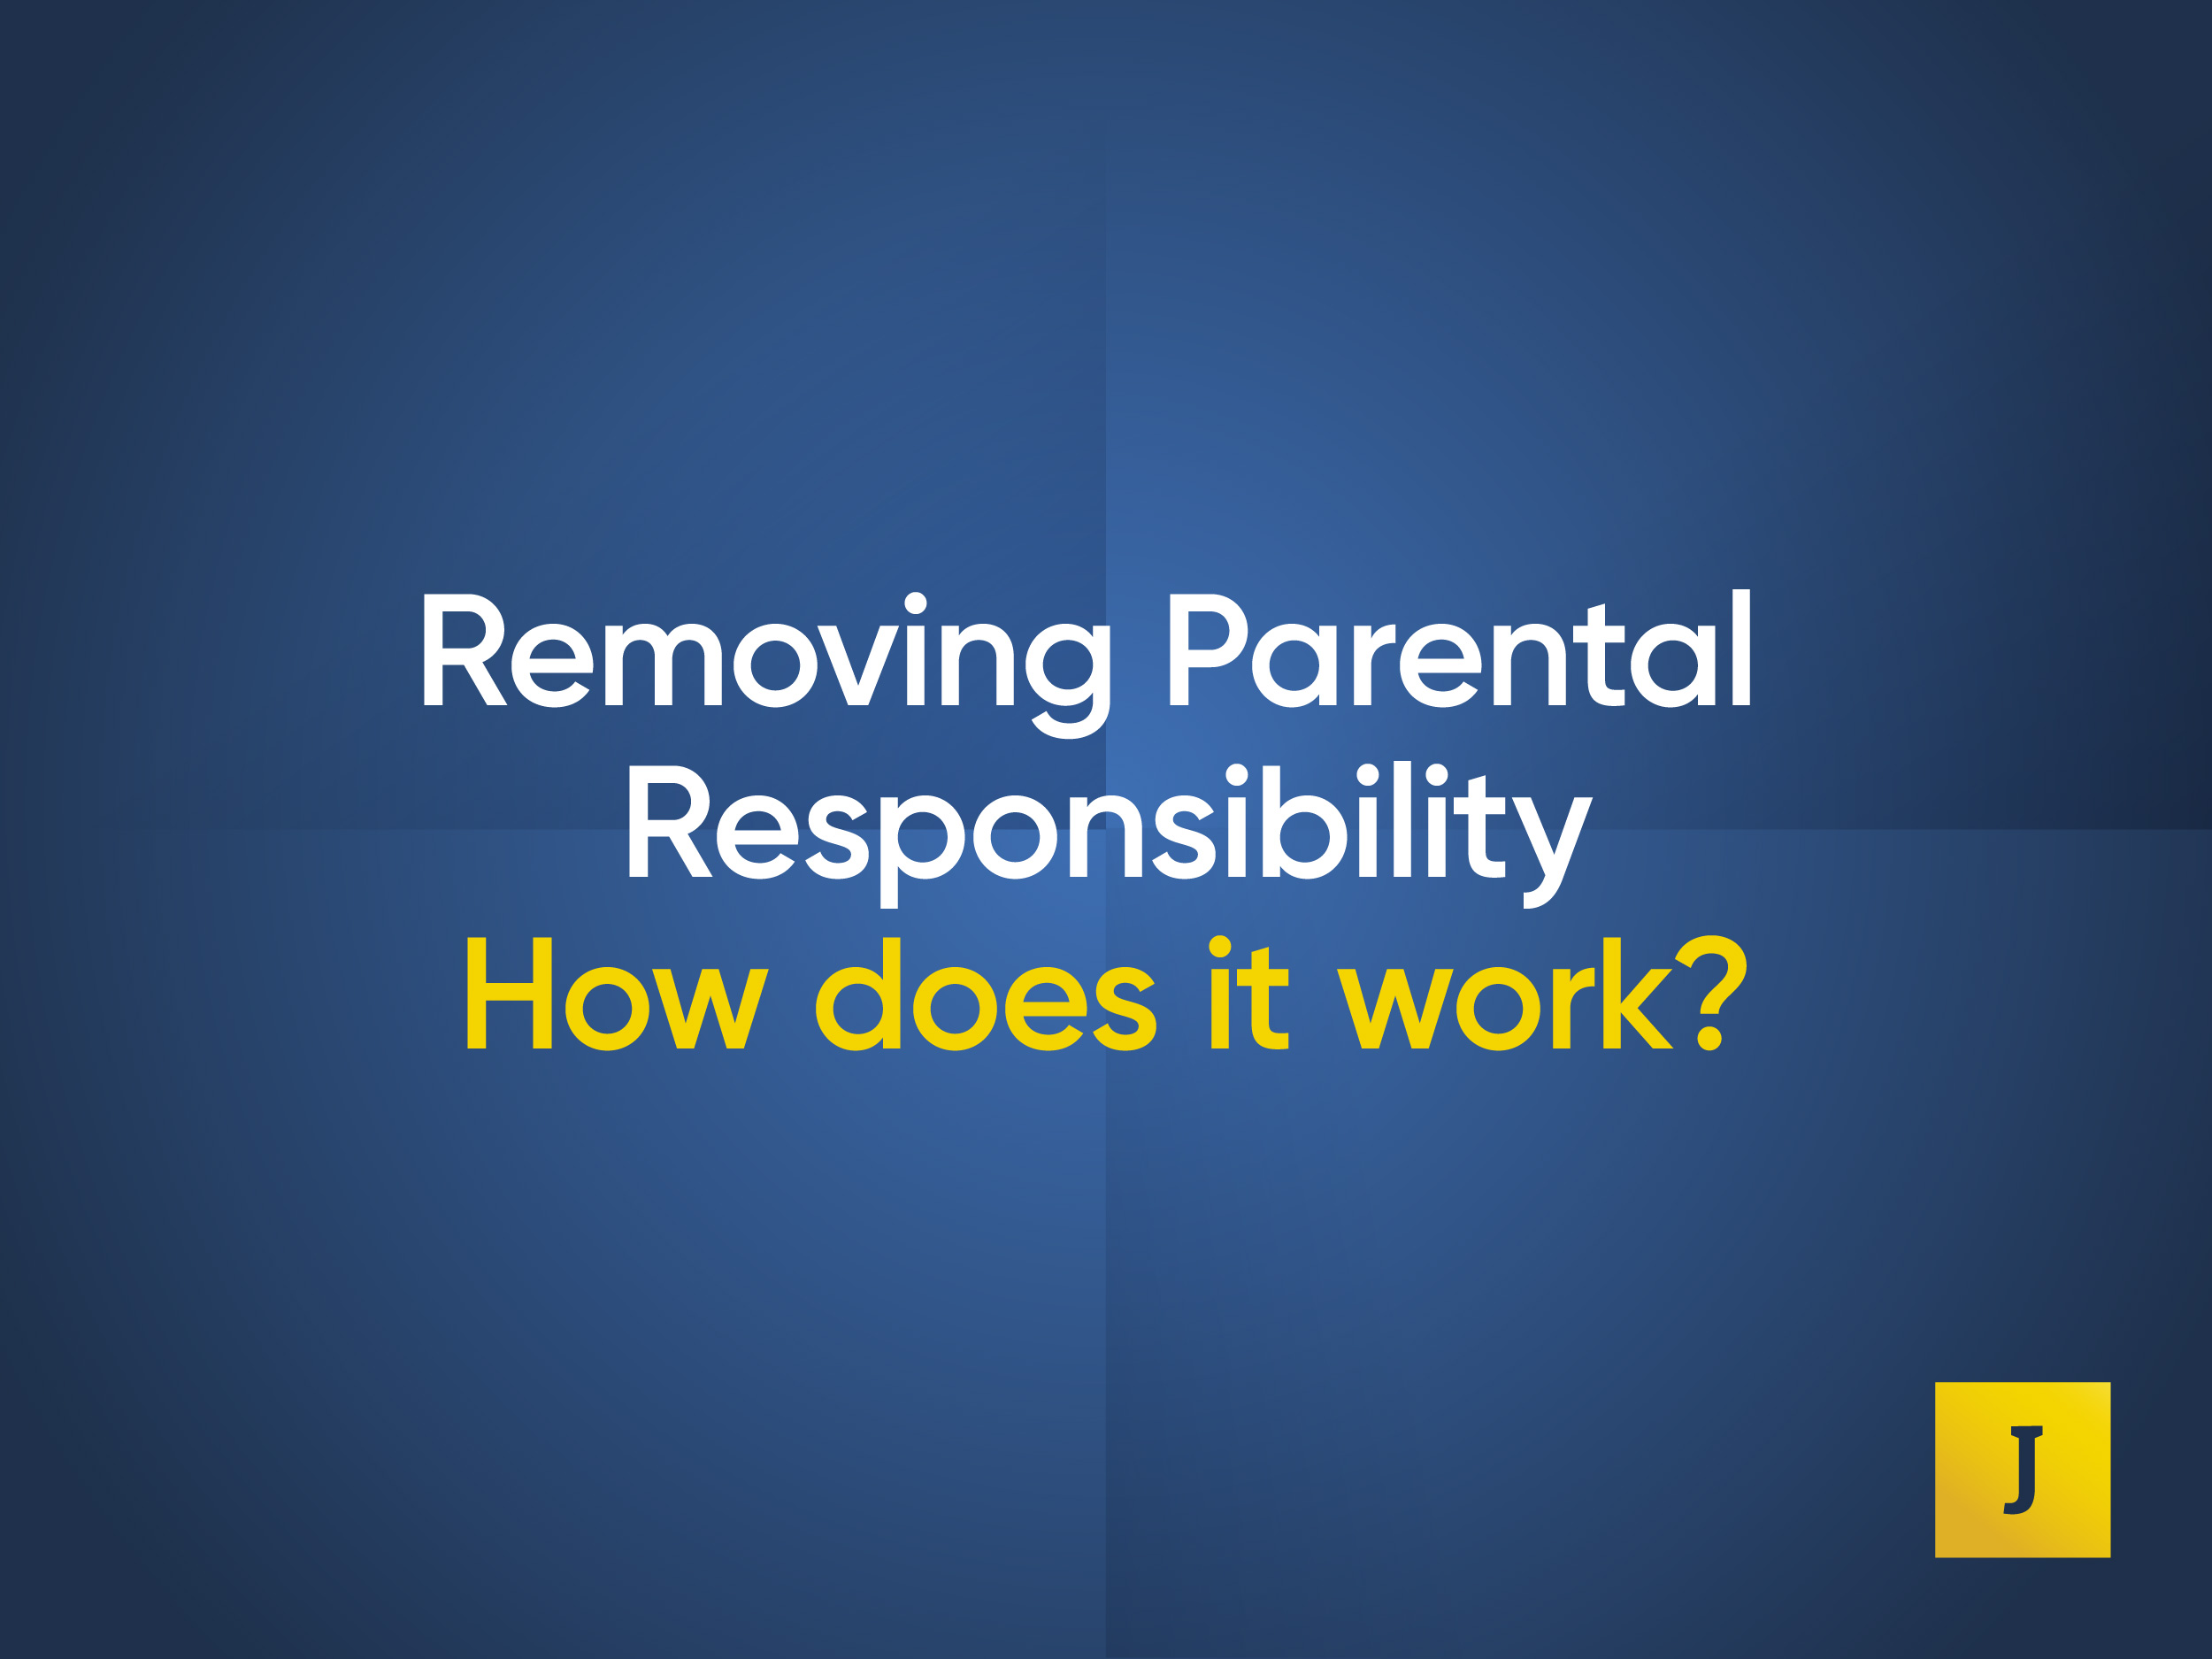 Removing Parental Responsibility, Jefferies Family Law Solicitors